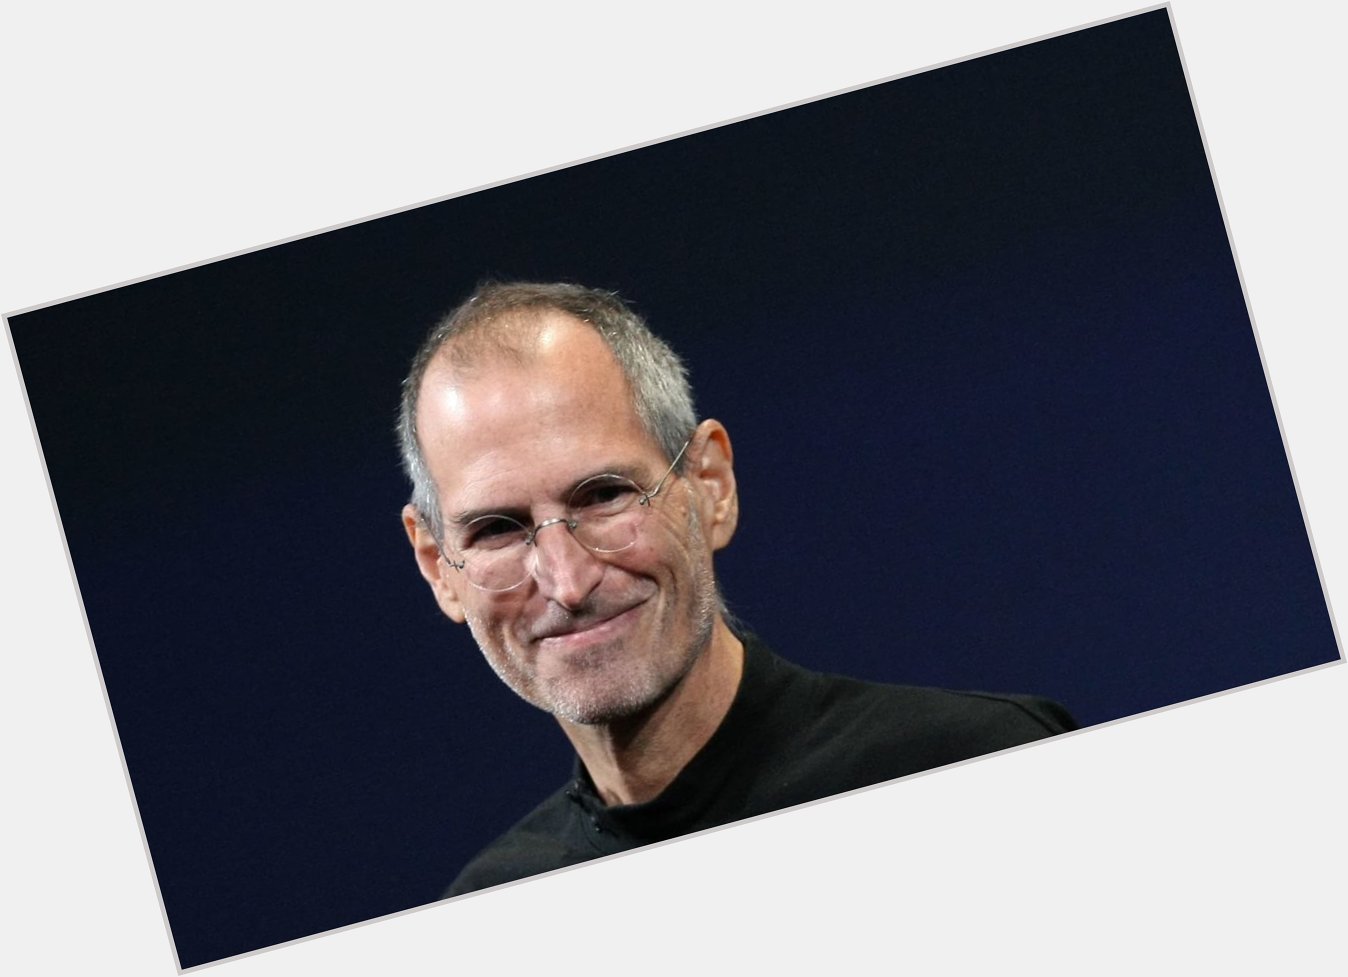 Happy Birthday Steve Jobs!

-

We miss you!      -

You changed the game - 

Imagine what you could do today 